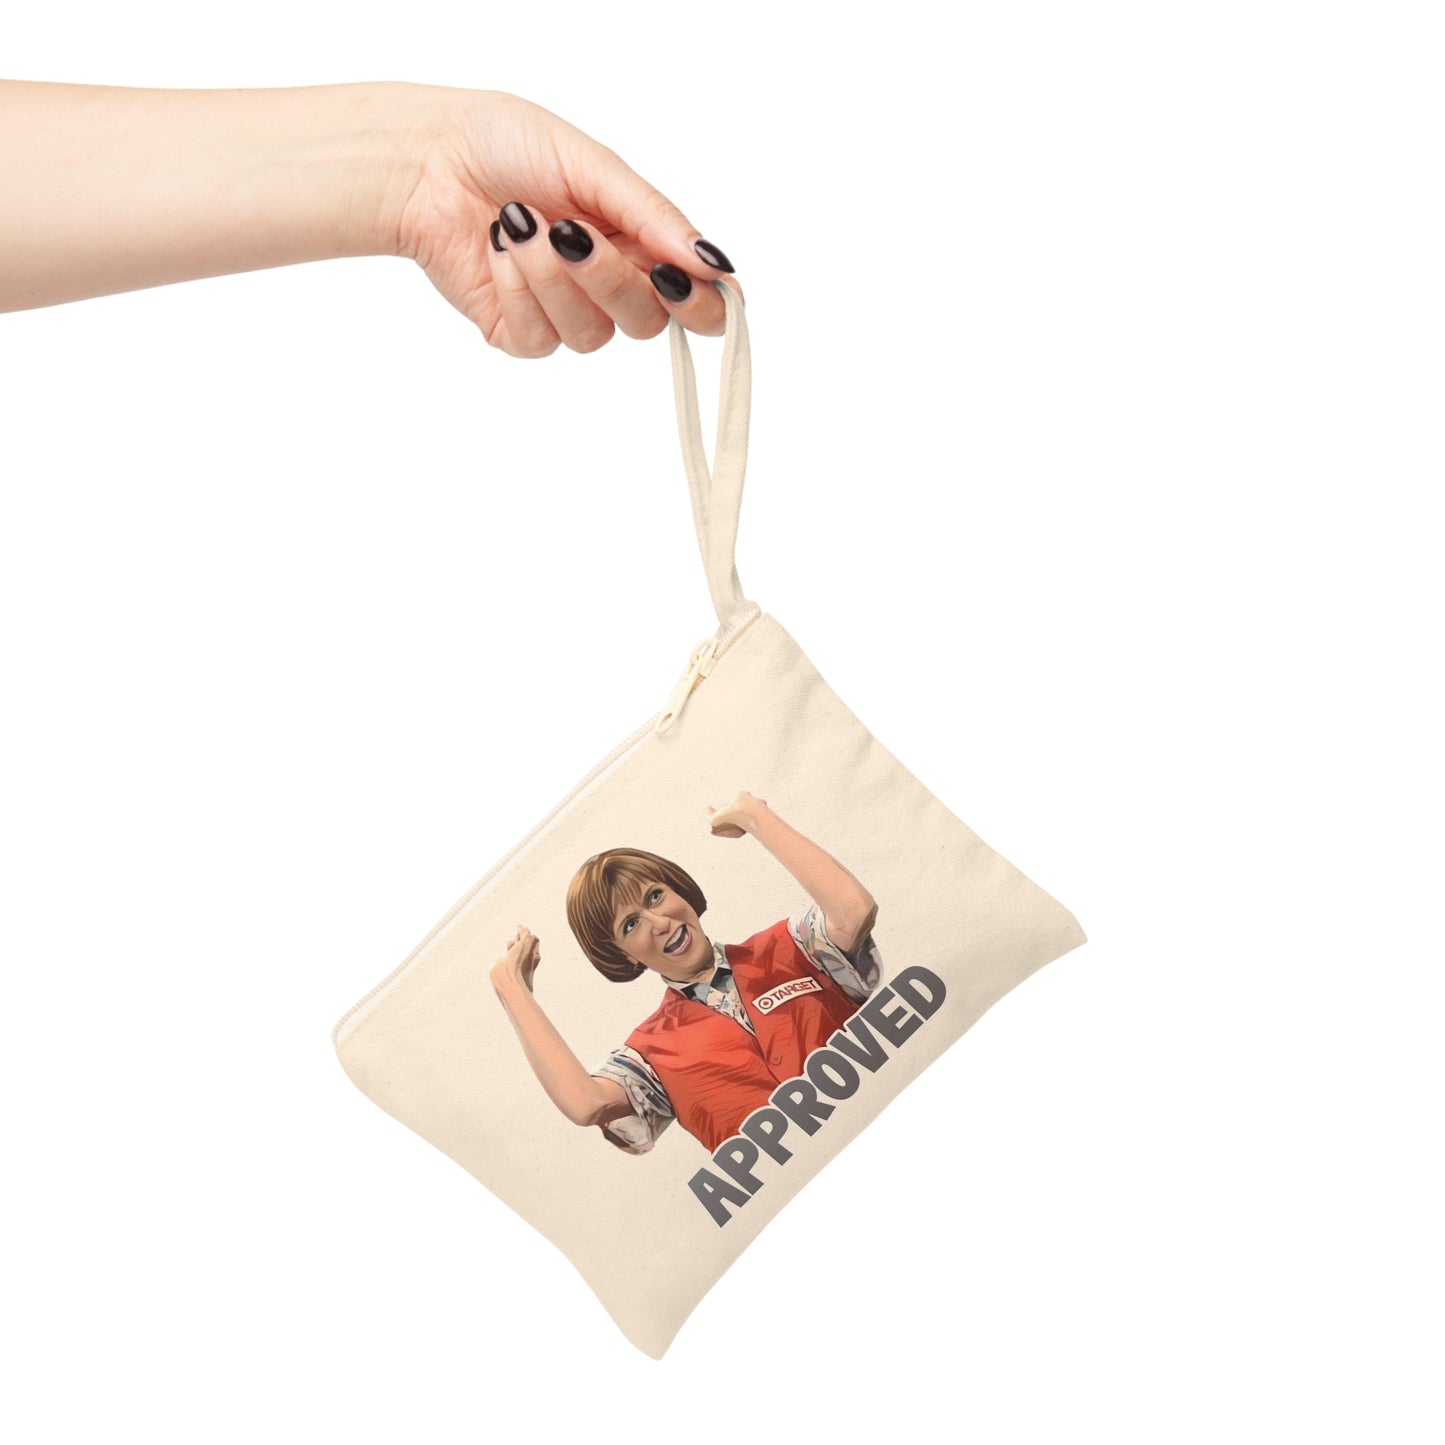 Target Lady Pouch, SNL, Kristin Wiig, Cosplay, Approved